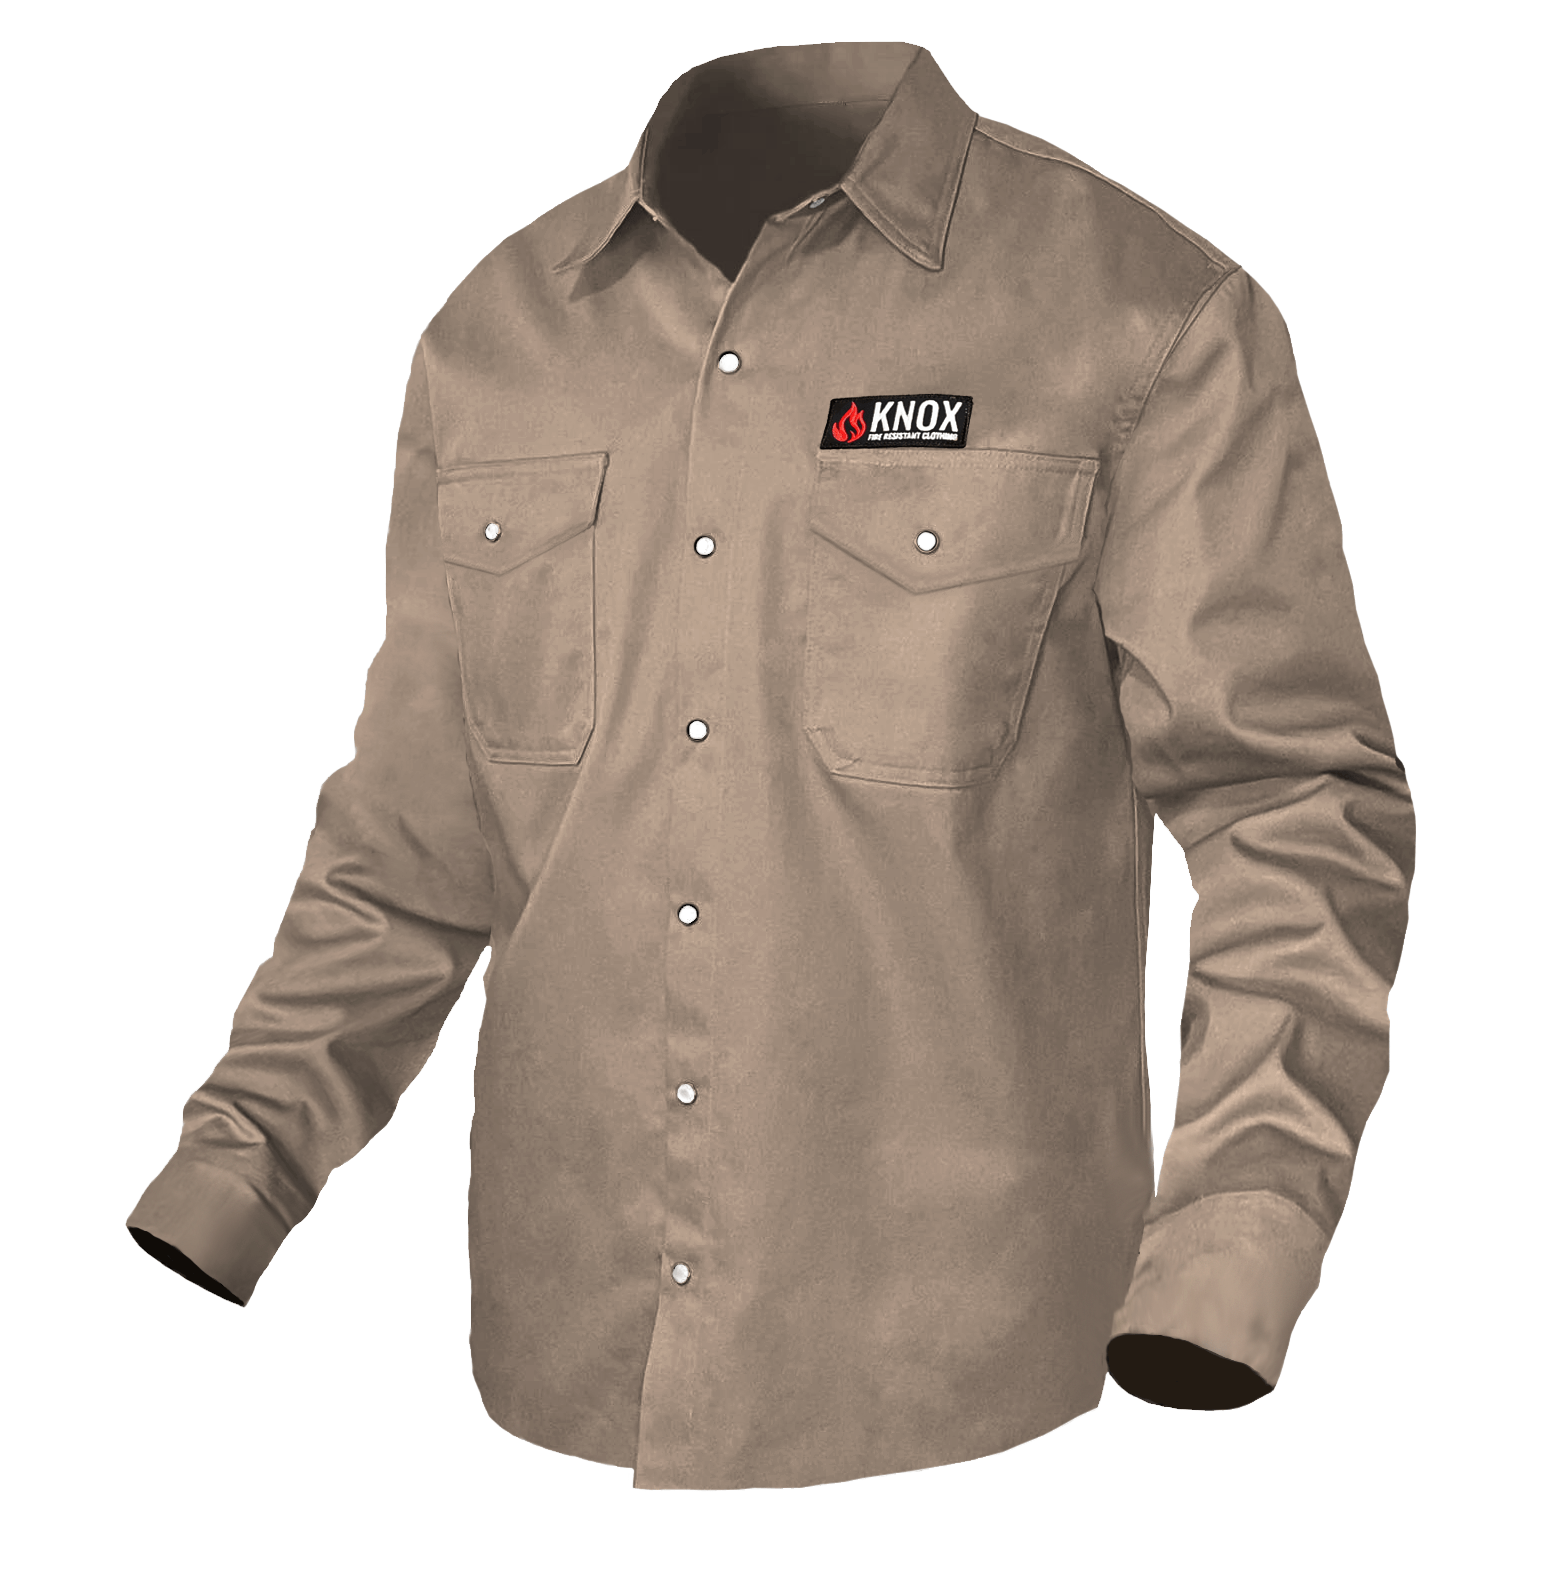 Knox Incorporated Apparel & Accessories Knox FR Shirt Tan With Pearl Snap Buttons